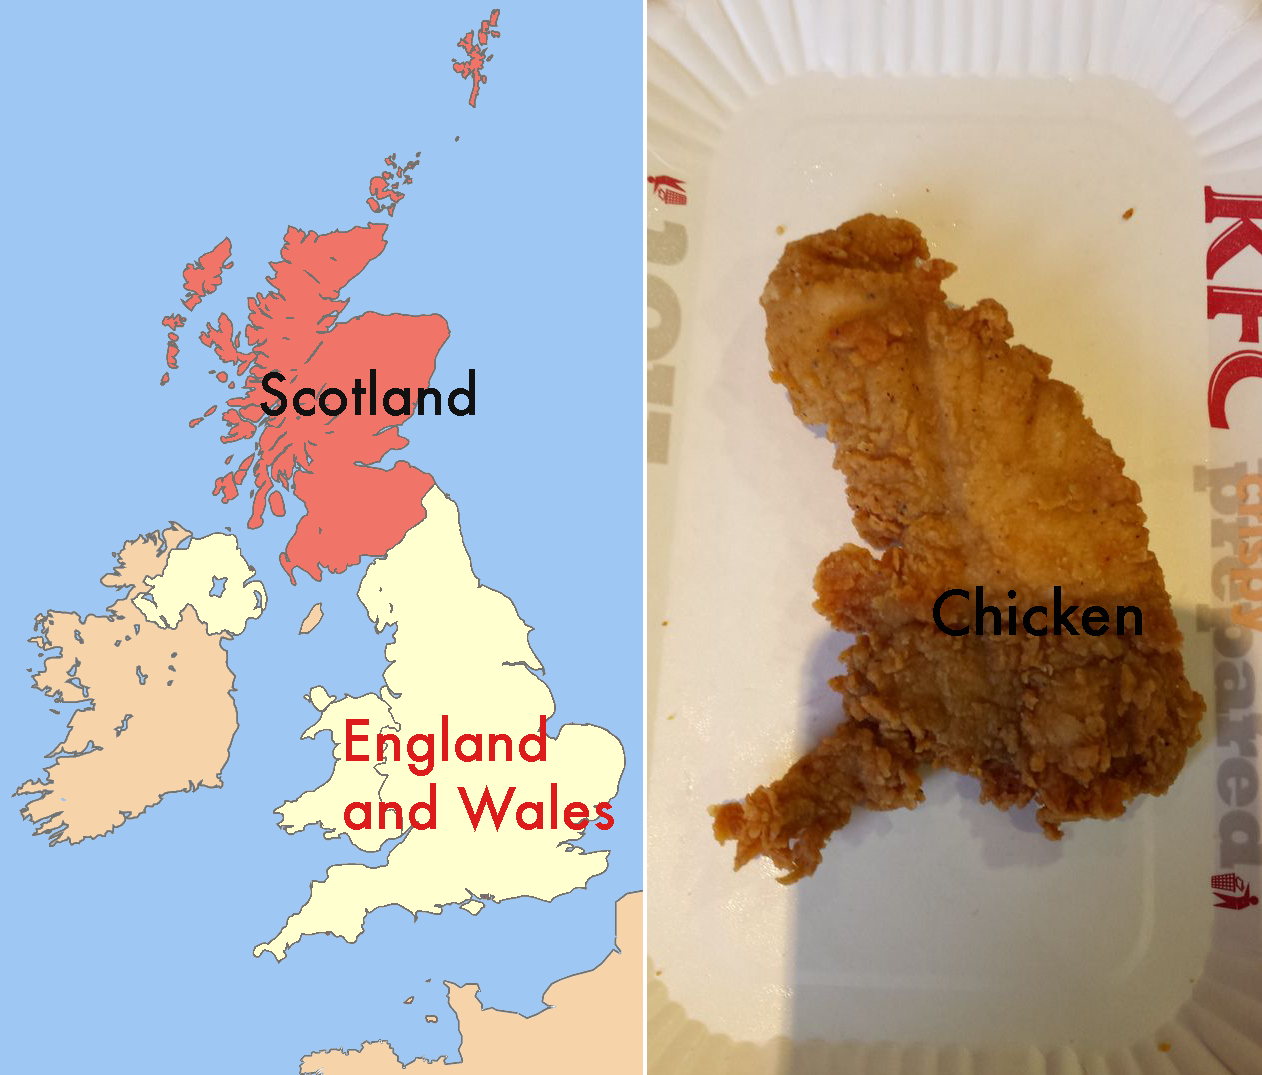 On the left, a map. On the right, chicken (via @DailyMirror)